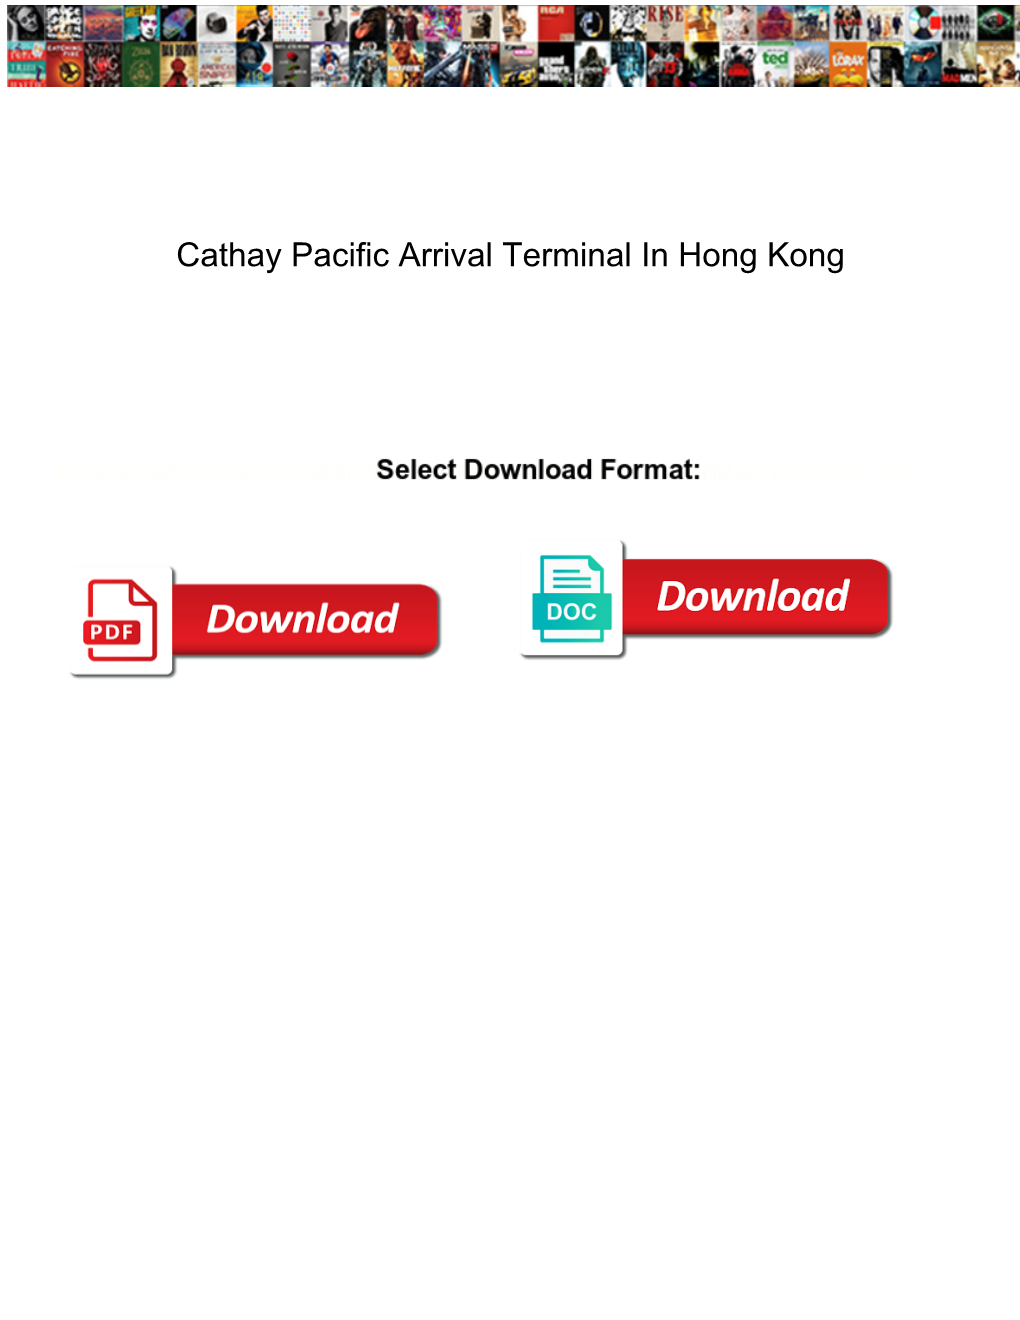 Cathay Pacific Arrival Terminal in Hong Kong